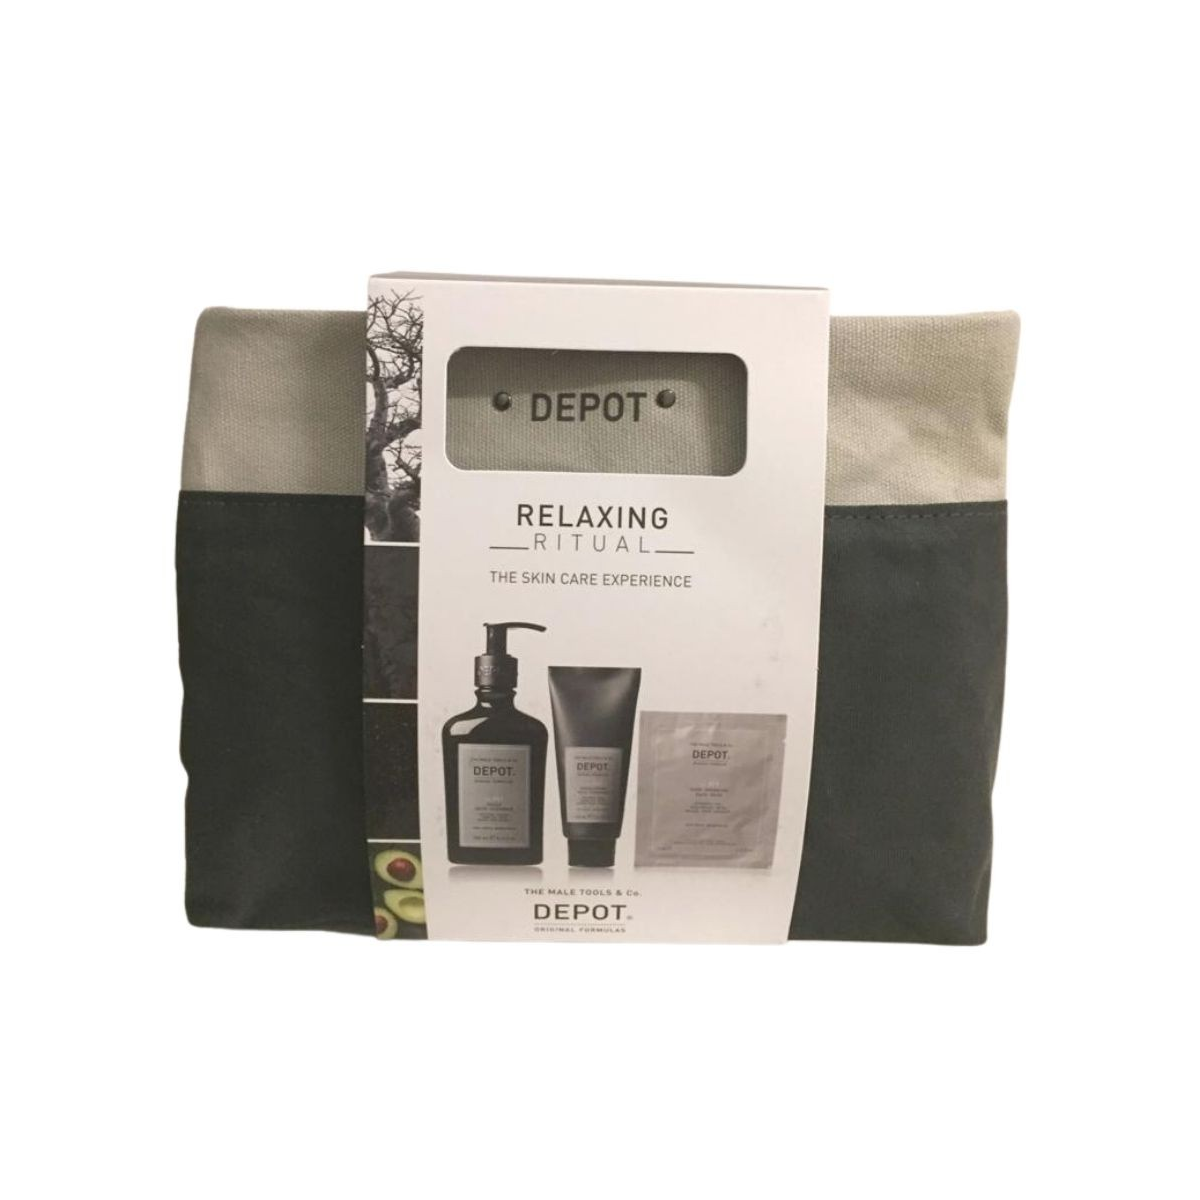 DEPOT - RELAXING RITUAL KIT - THE SKIN CARE EXPERIENCE